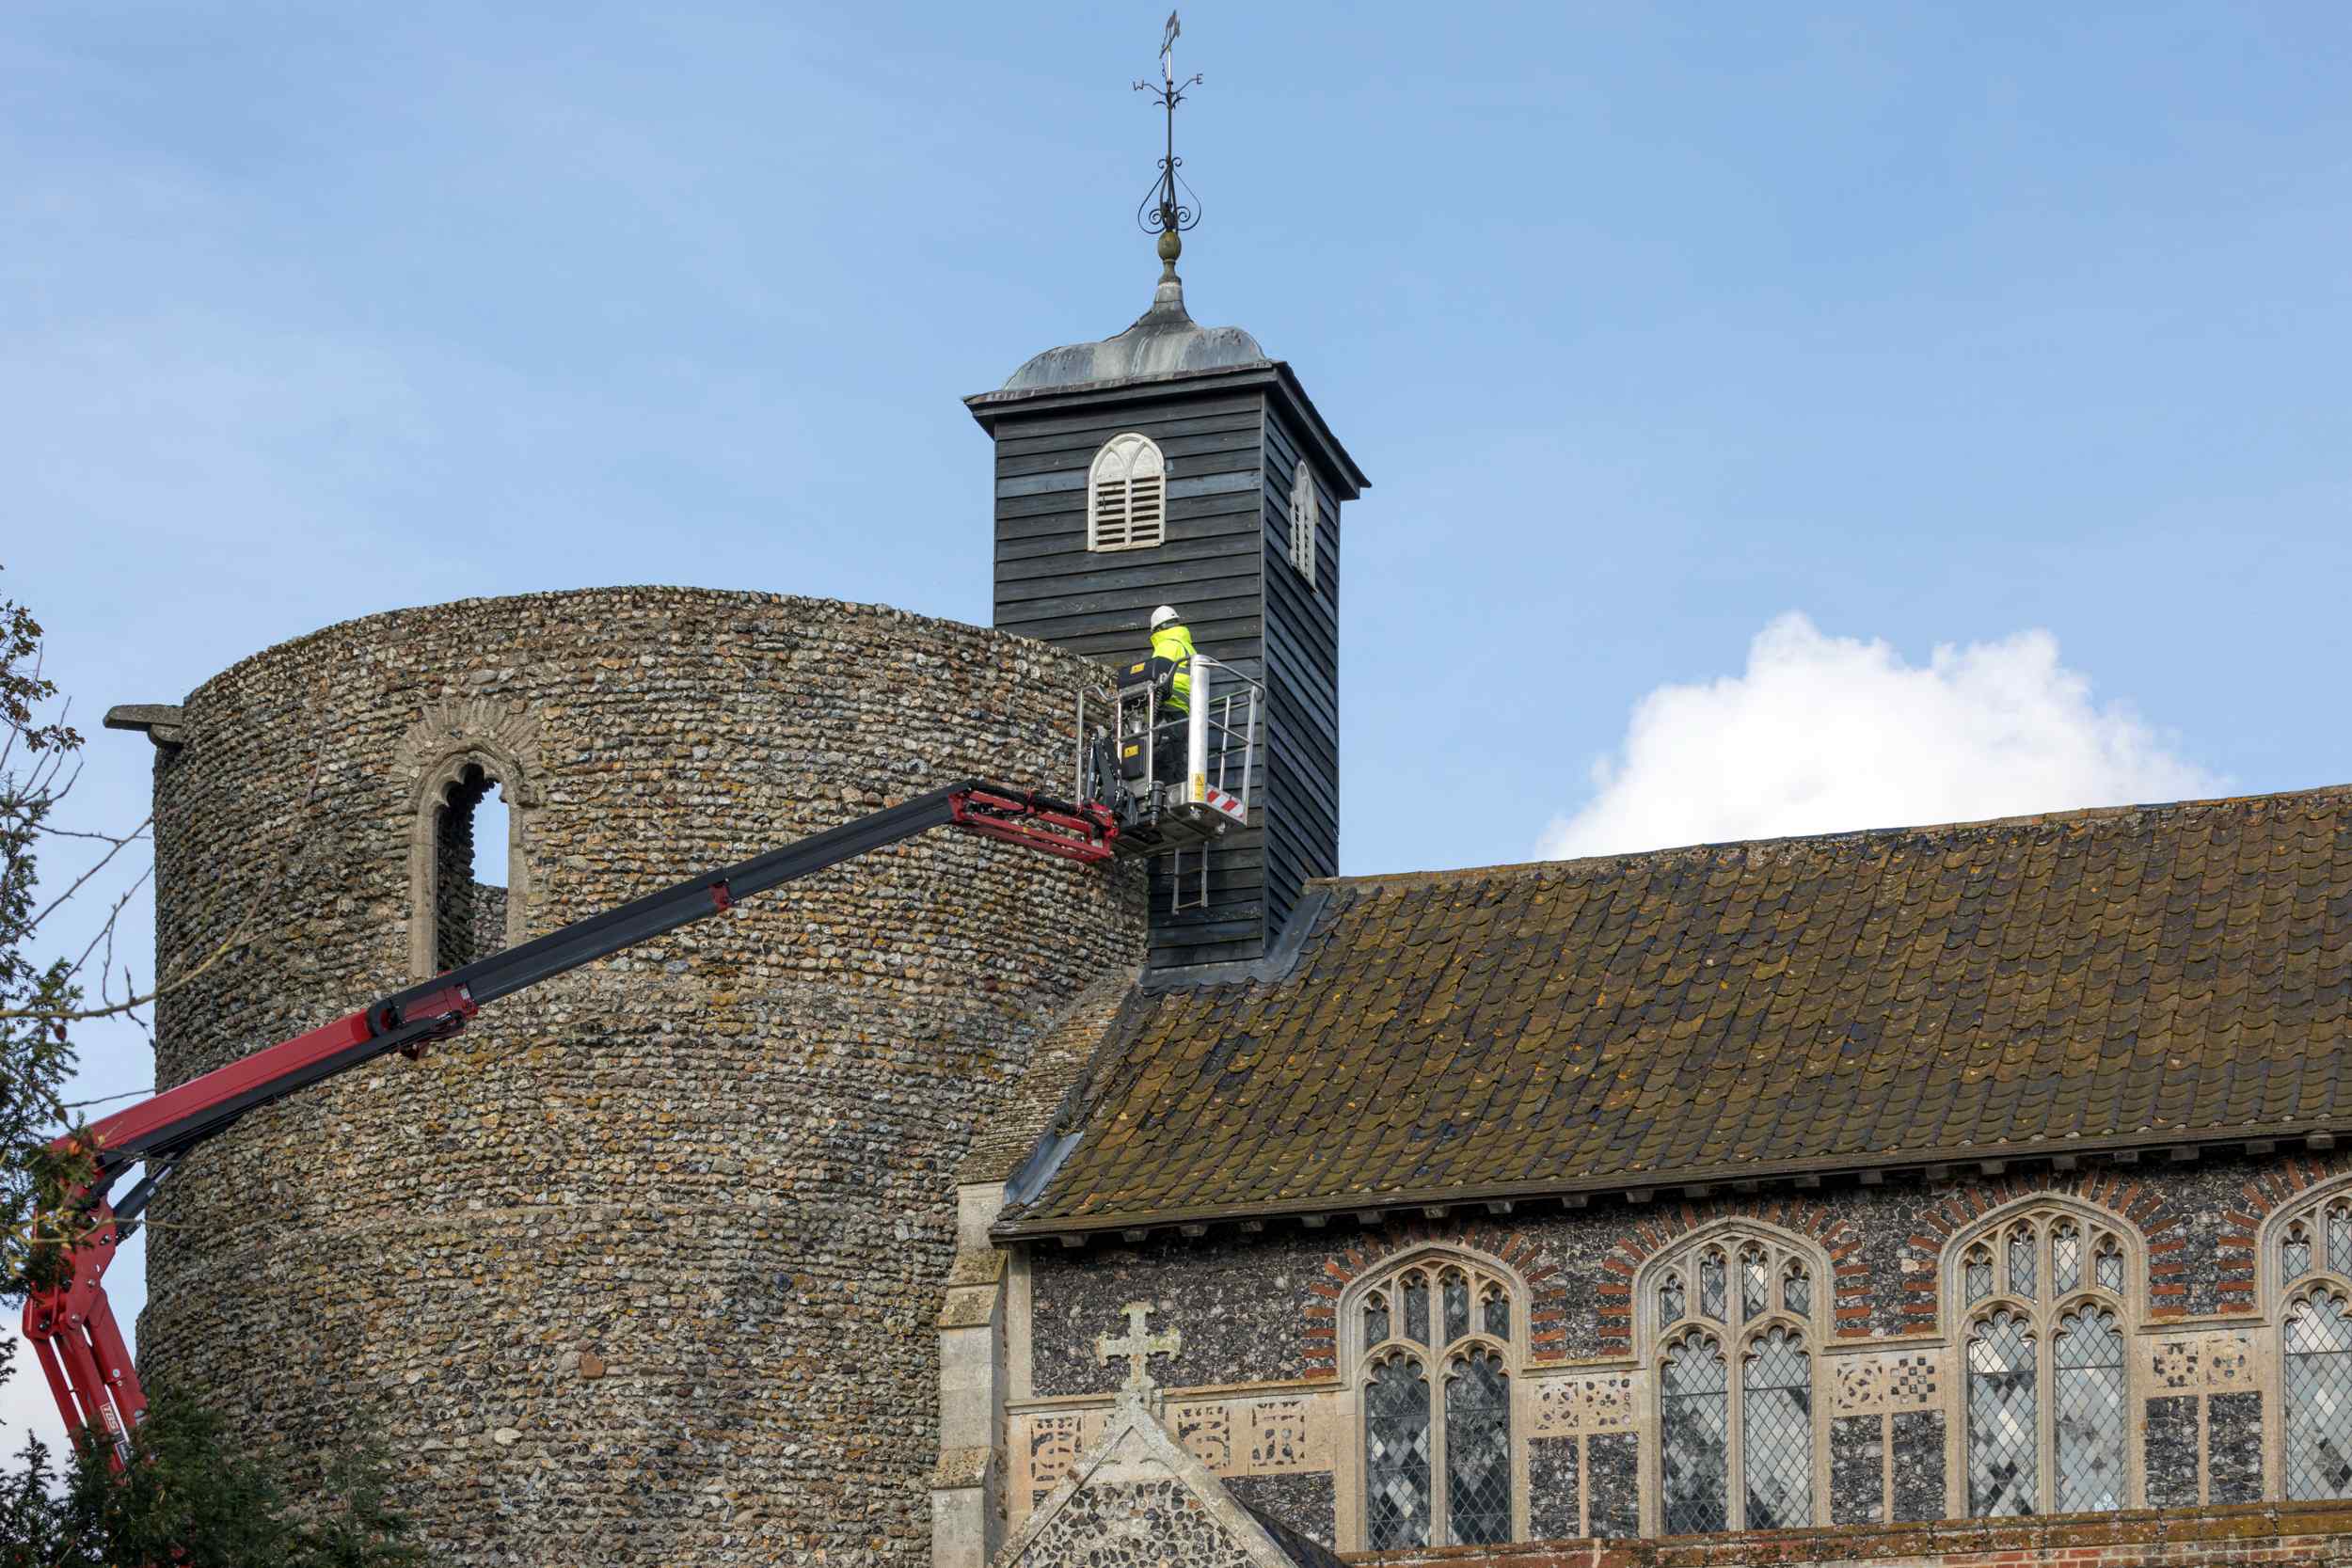 A man in high-vis jacket and hard hat works on the tower wall from a cherry picker.